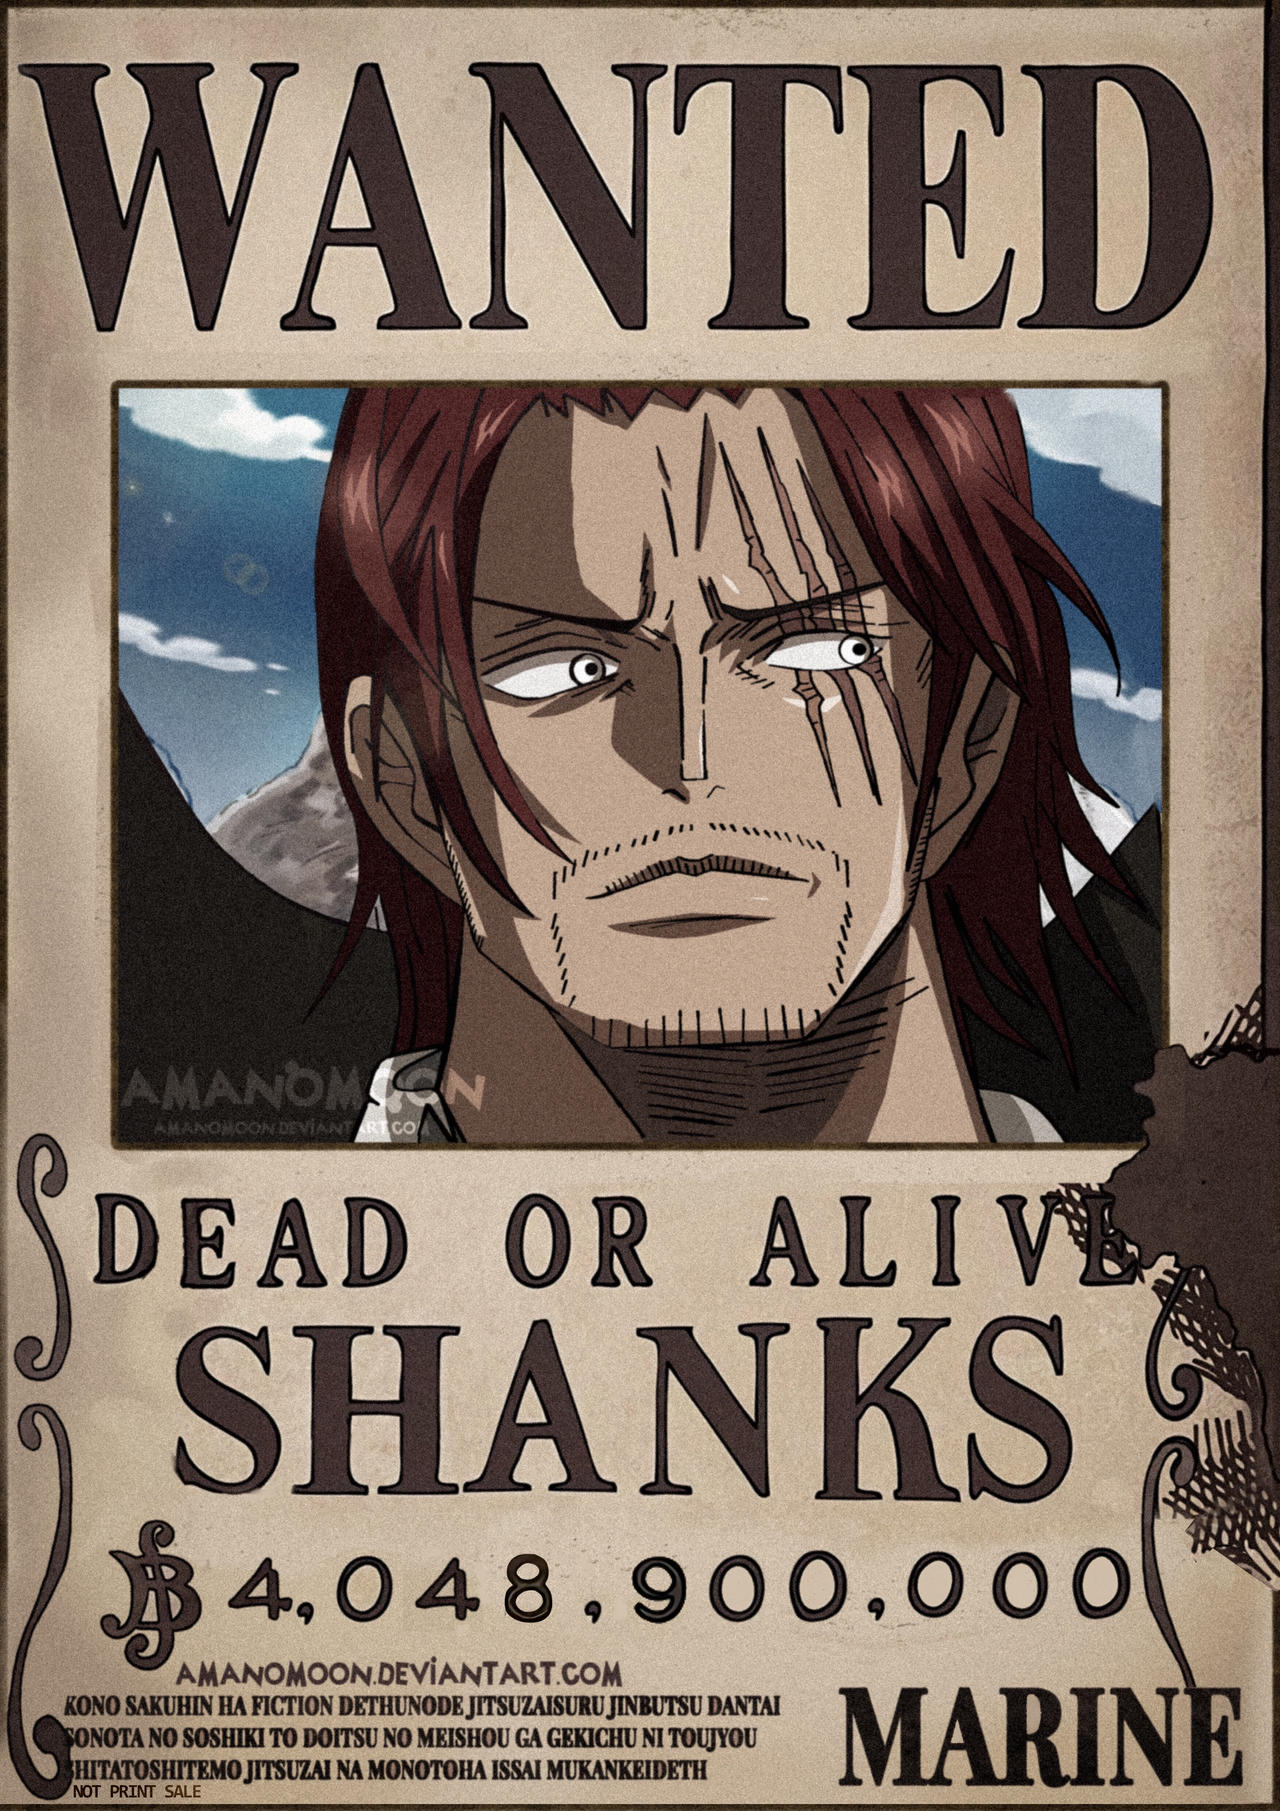 One Piece Chapter 957 Shanks Bounty Rocks Pirates By Amanomoon On Deviantart